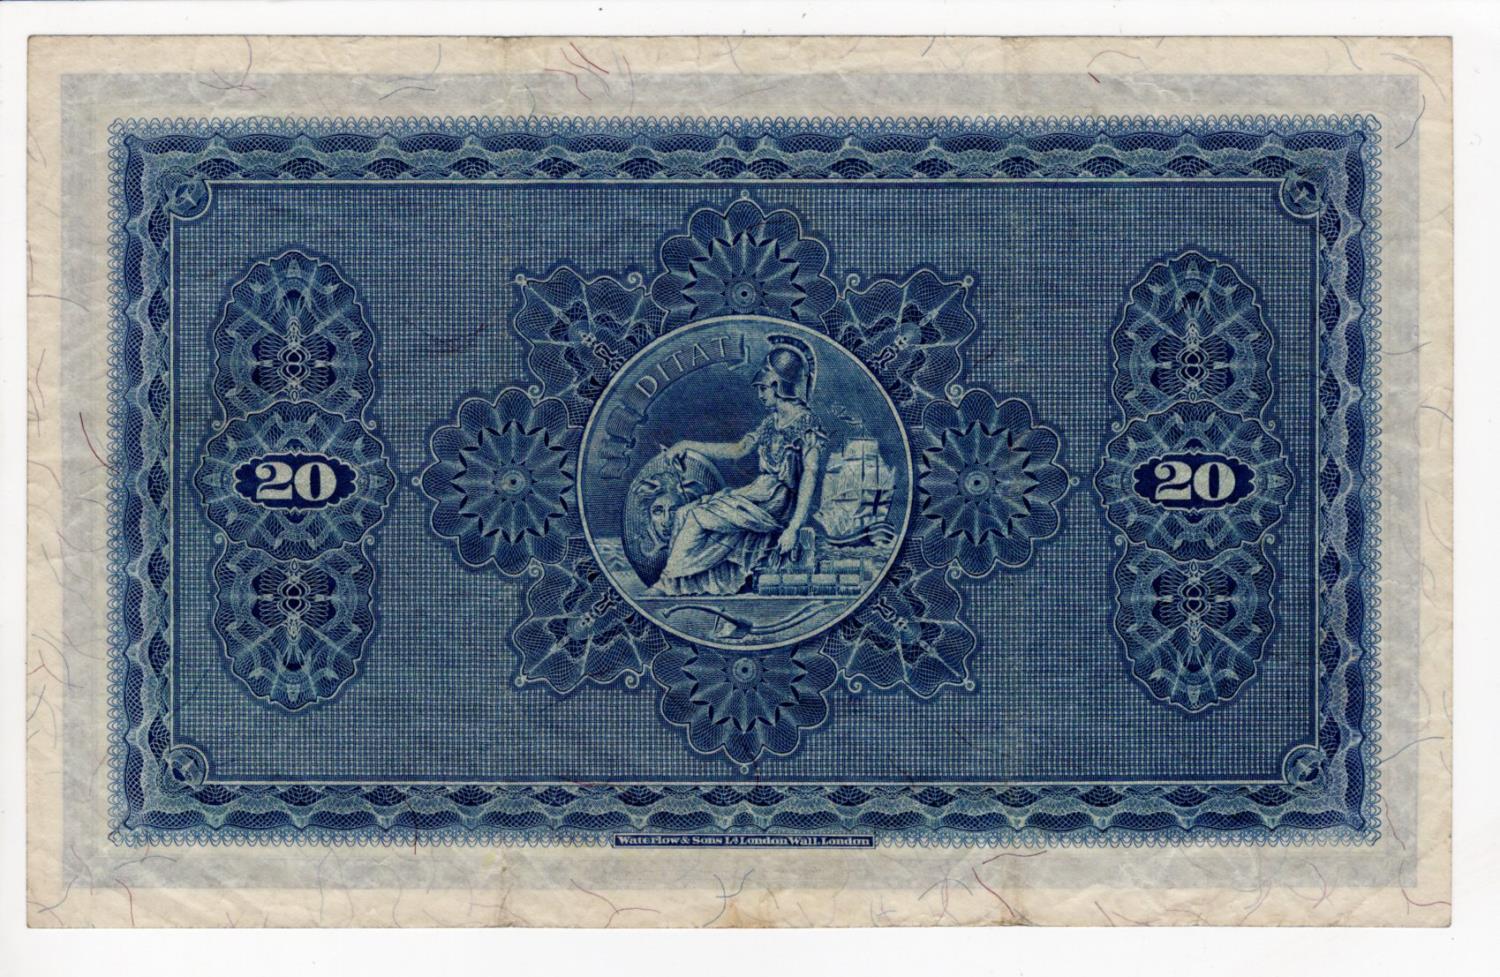 Scotland, British Linen Bank 20 Pounds dated 10th February 1953, signed A.P. Anderson, serial W/4 - Image 2 of 2